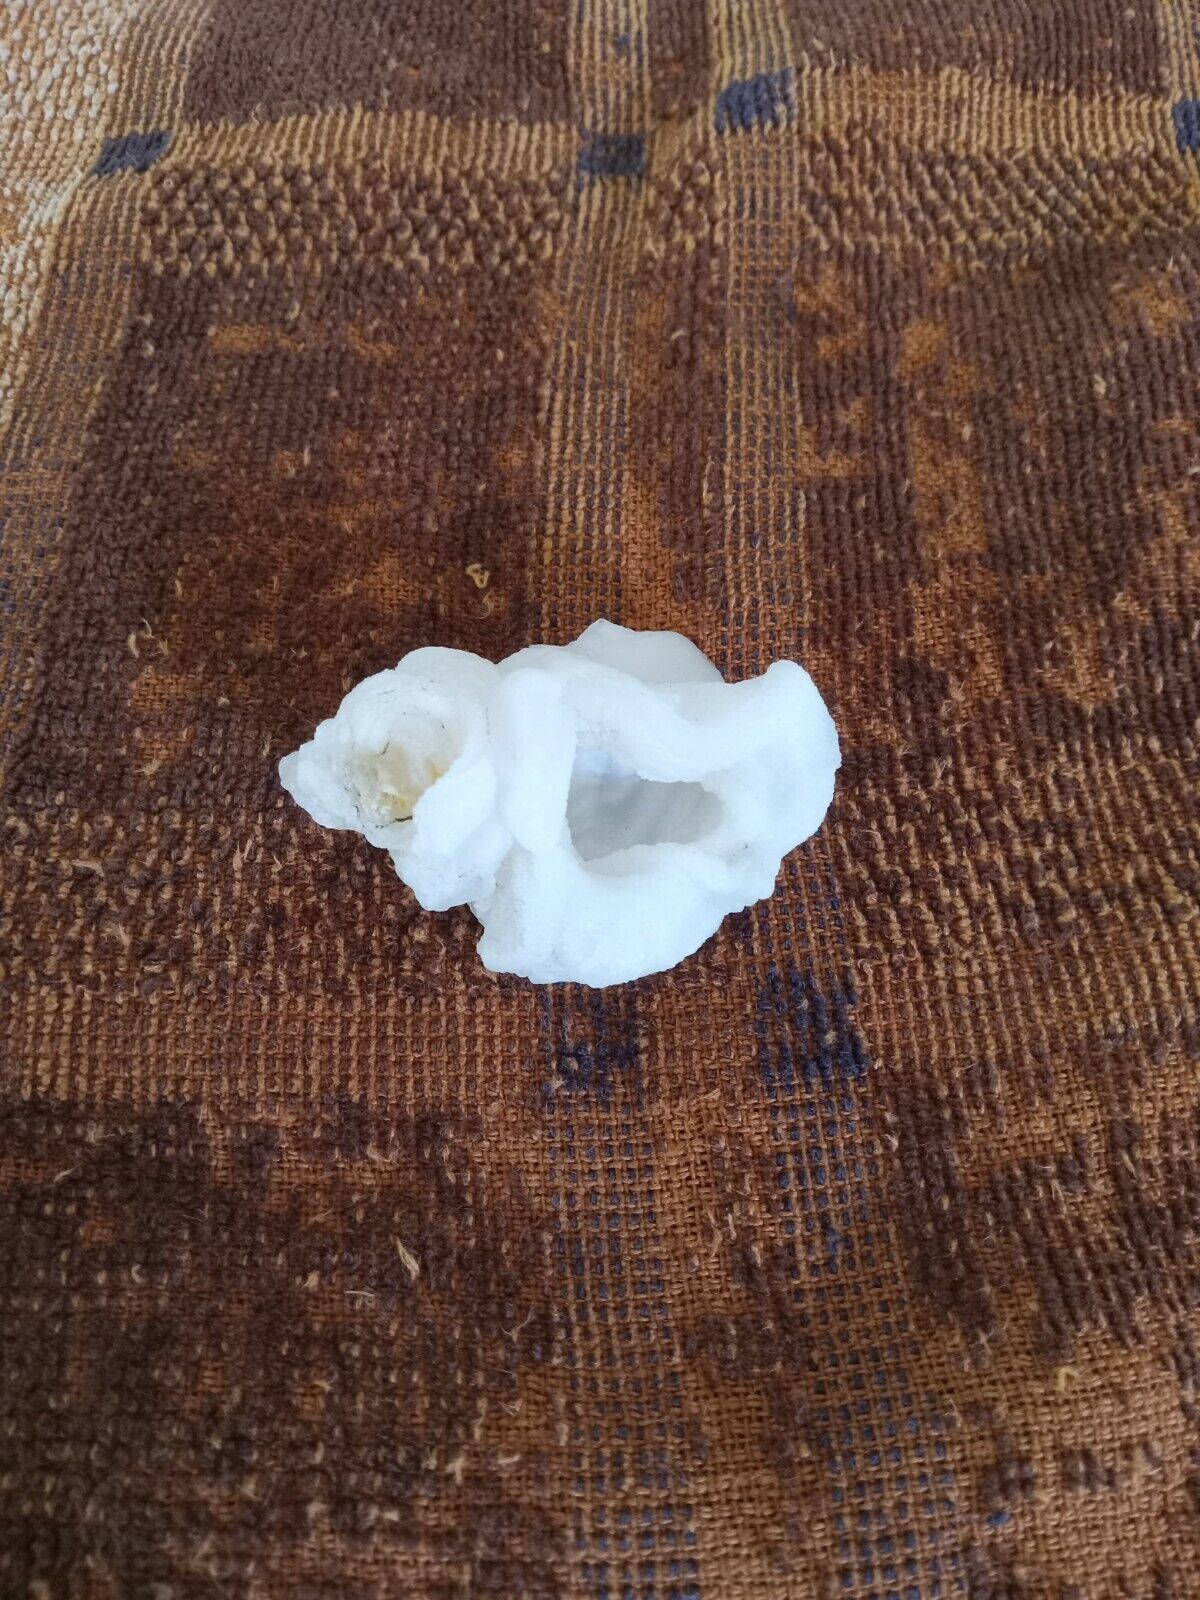 Unique White Flower-like Chalcedony mineral